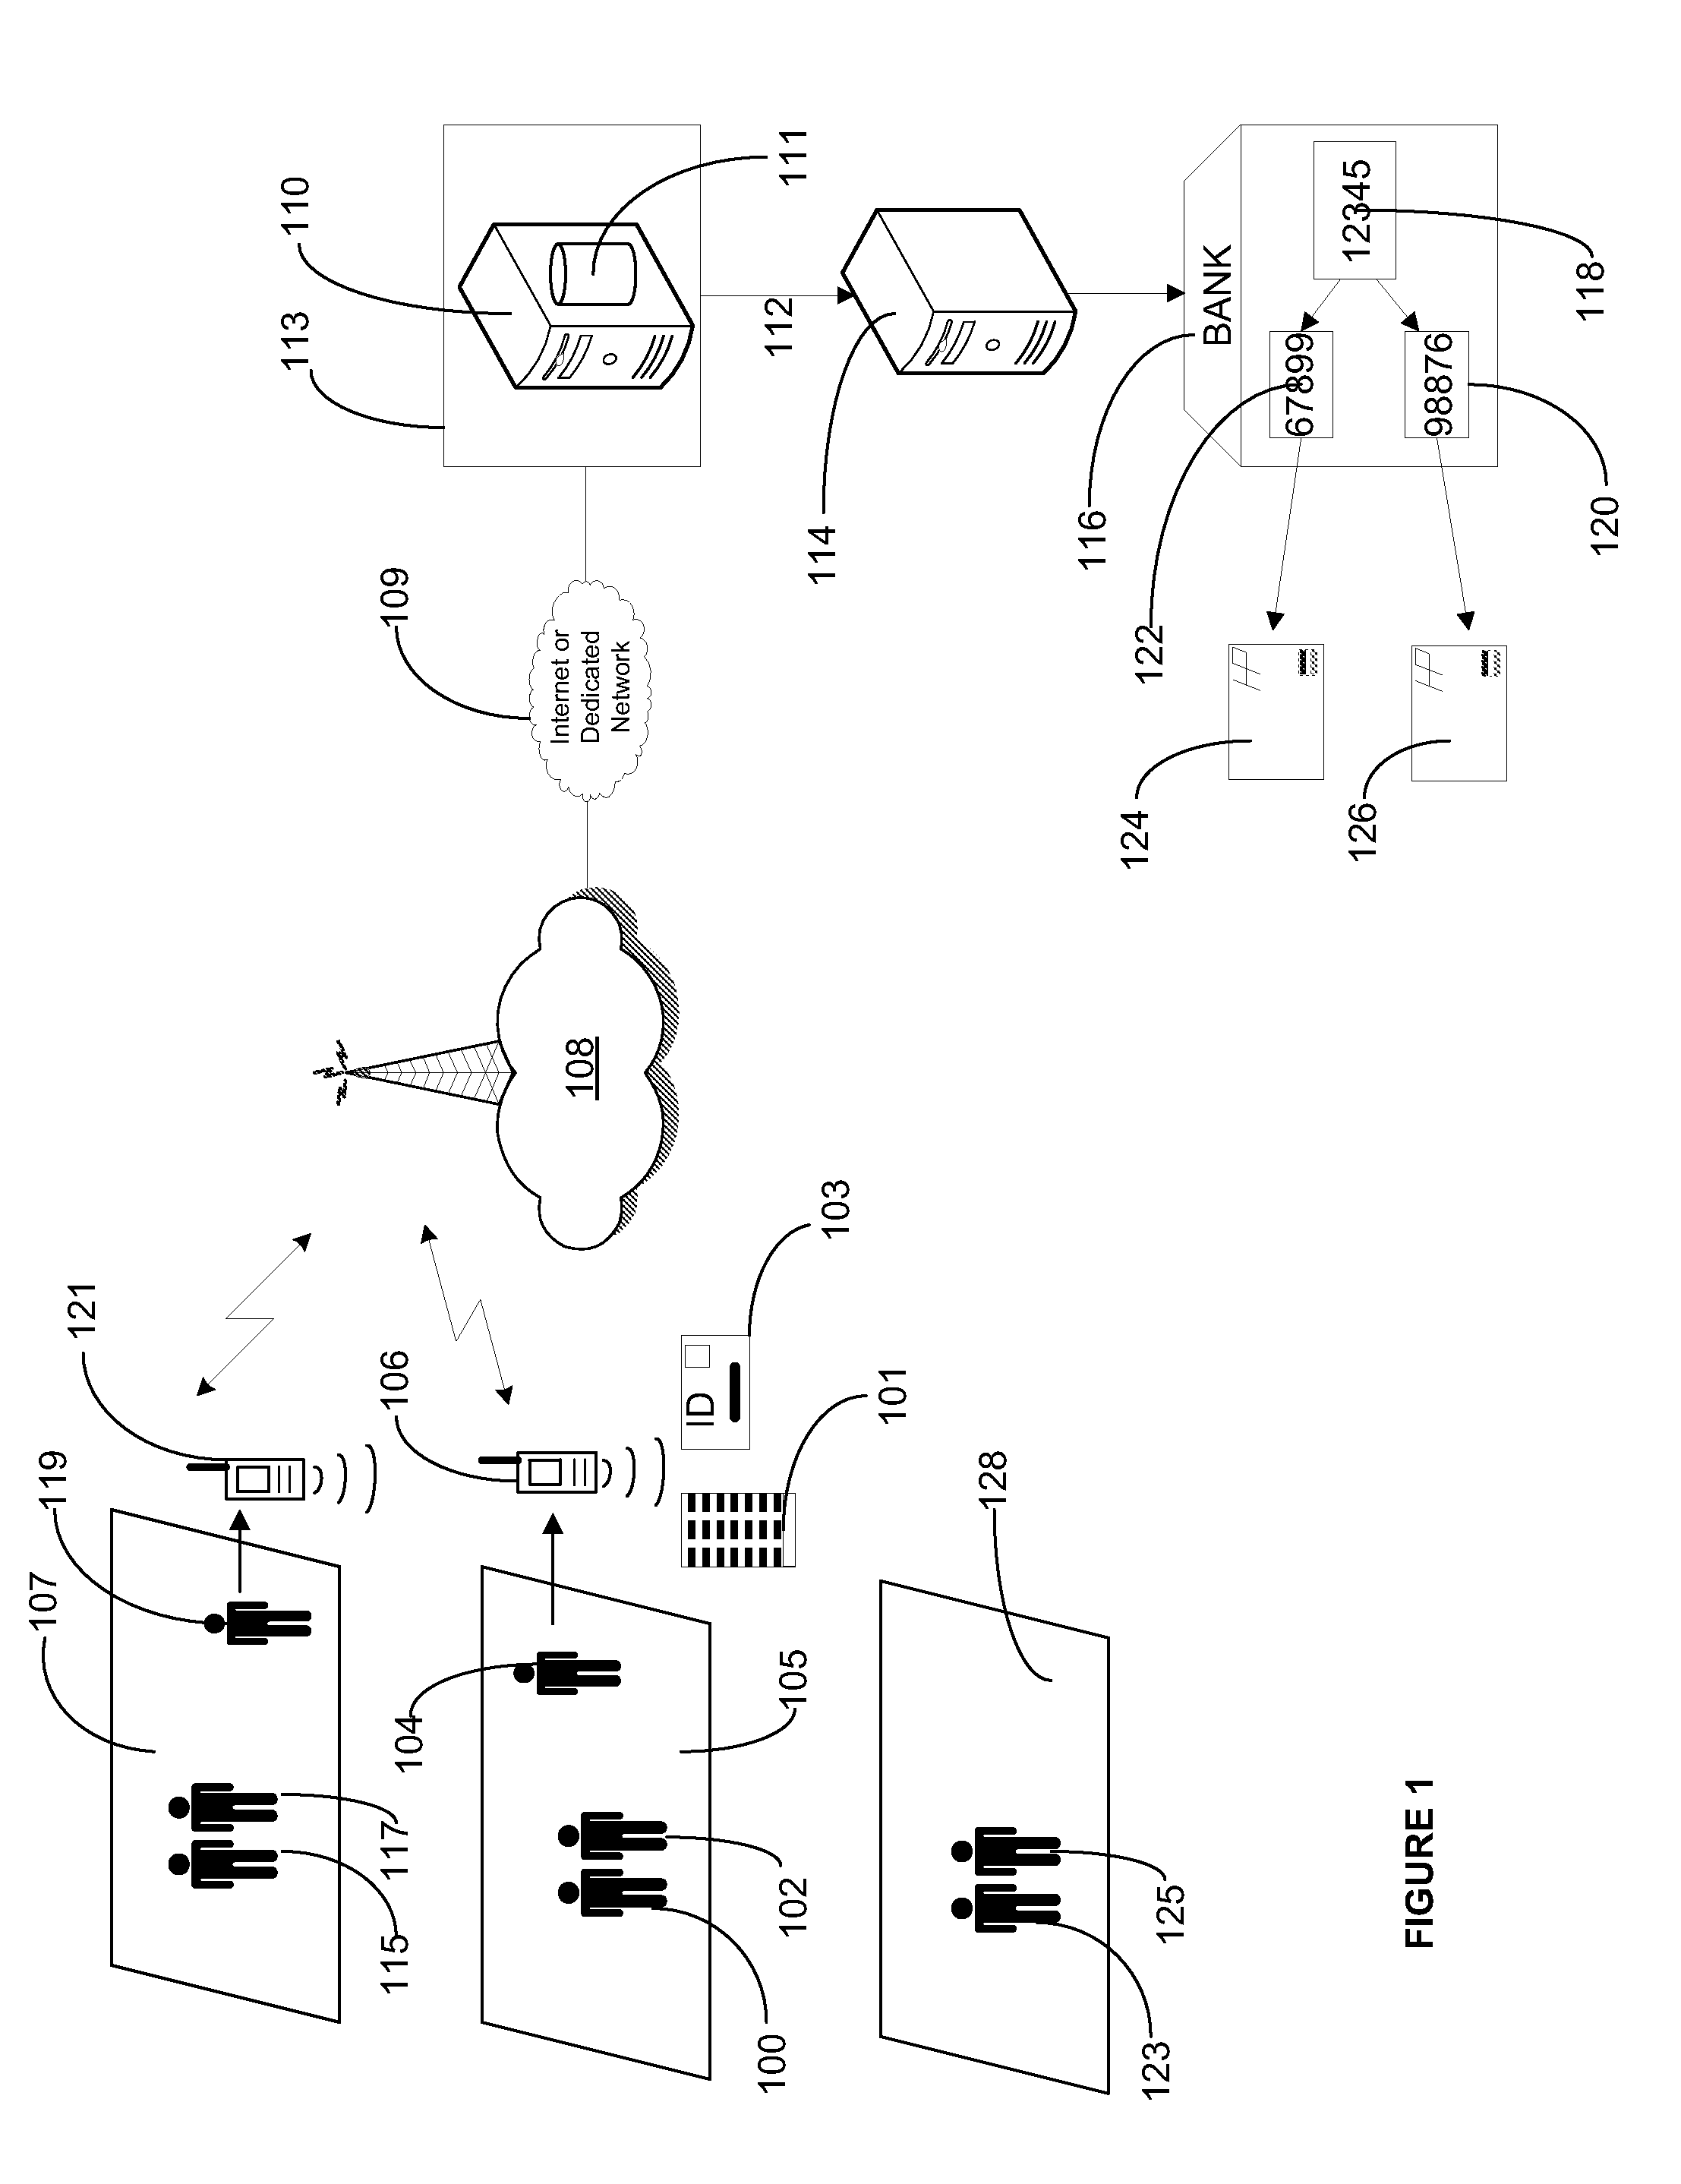 Mobile workforce management apparatus and method